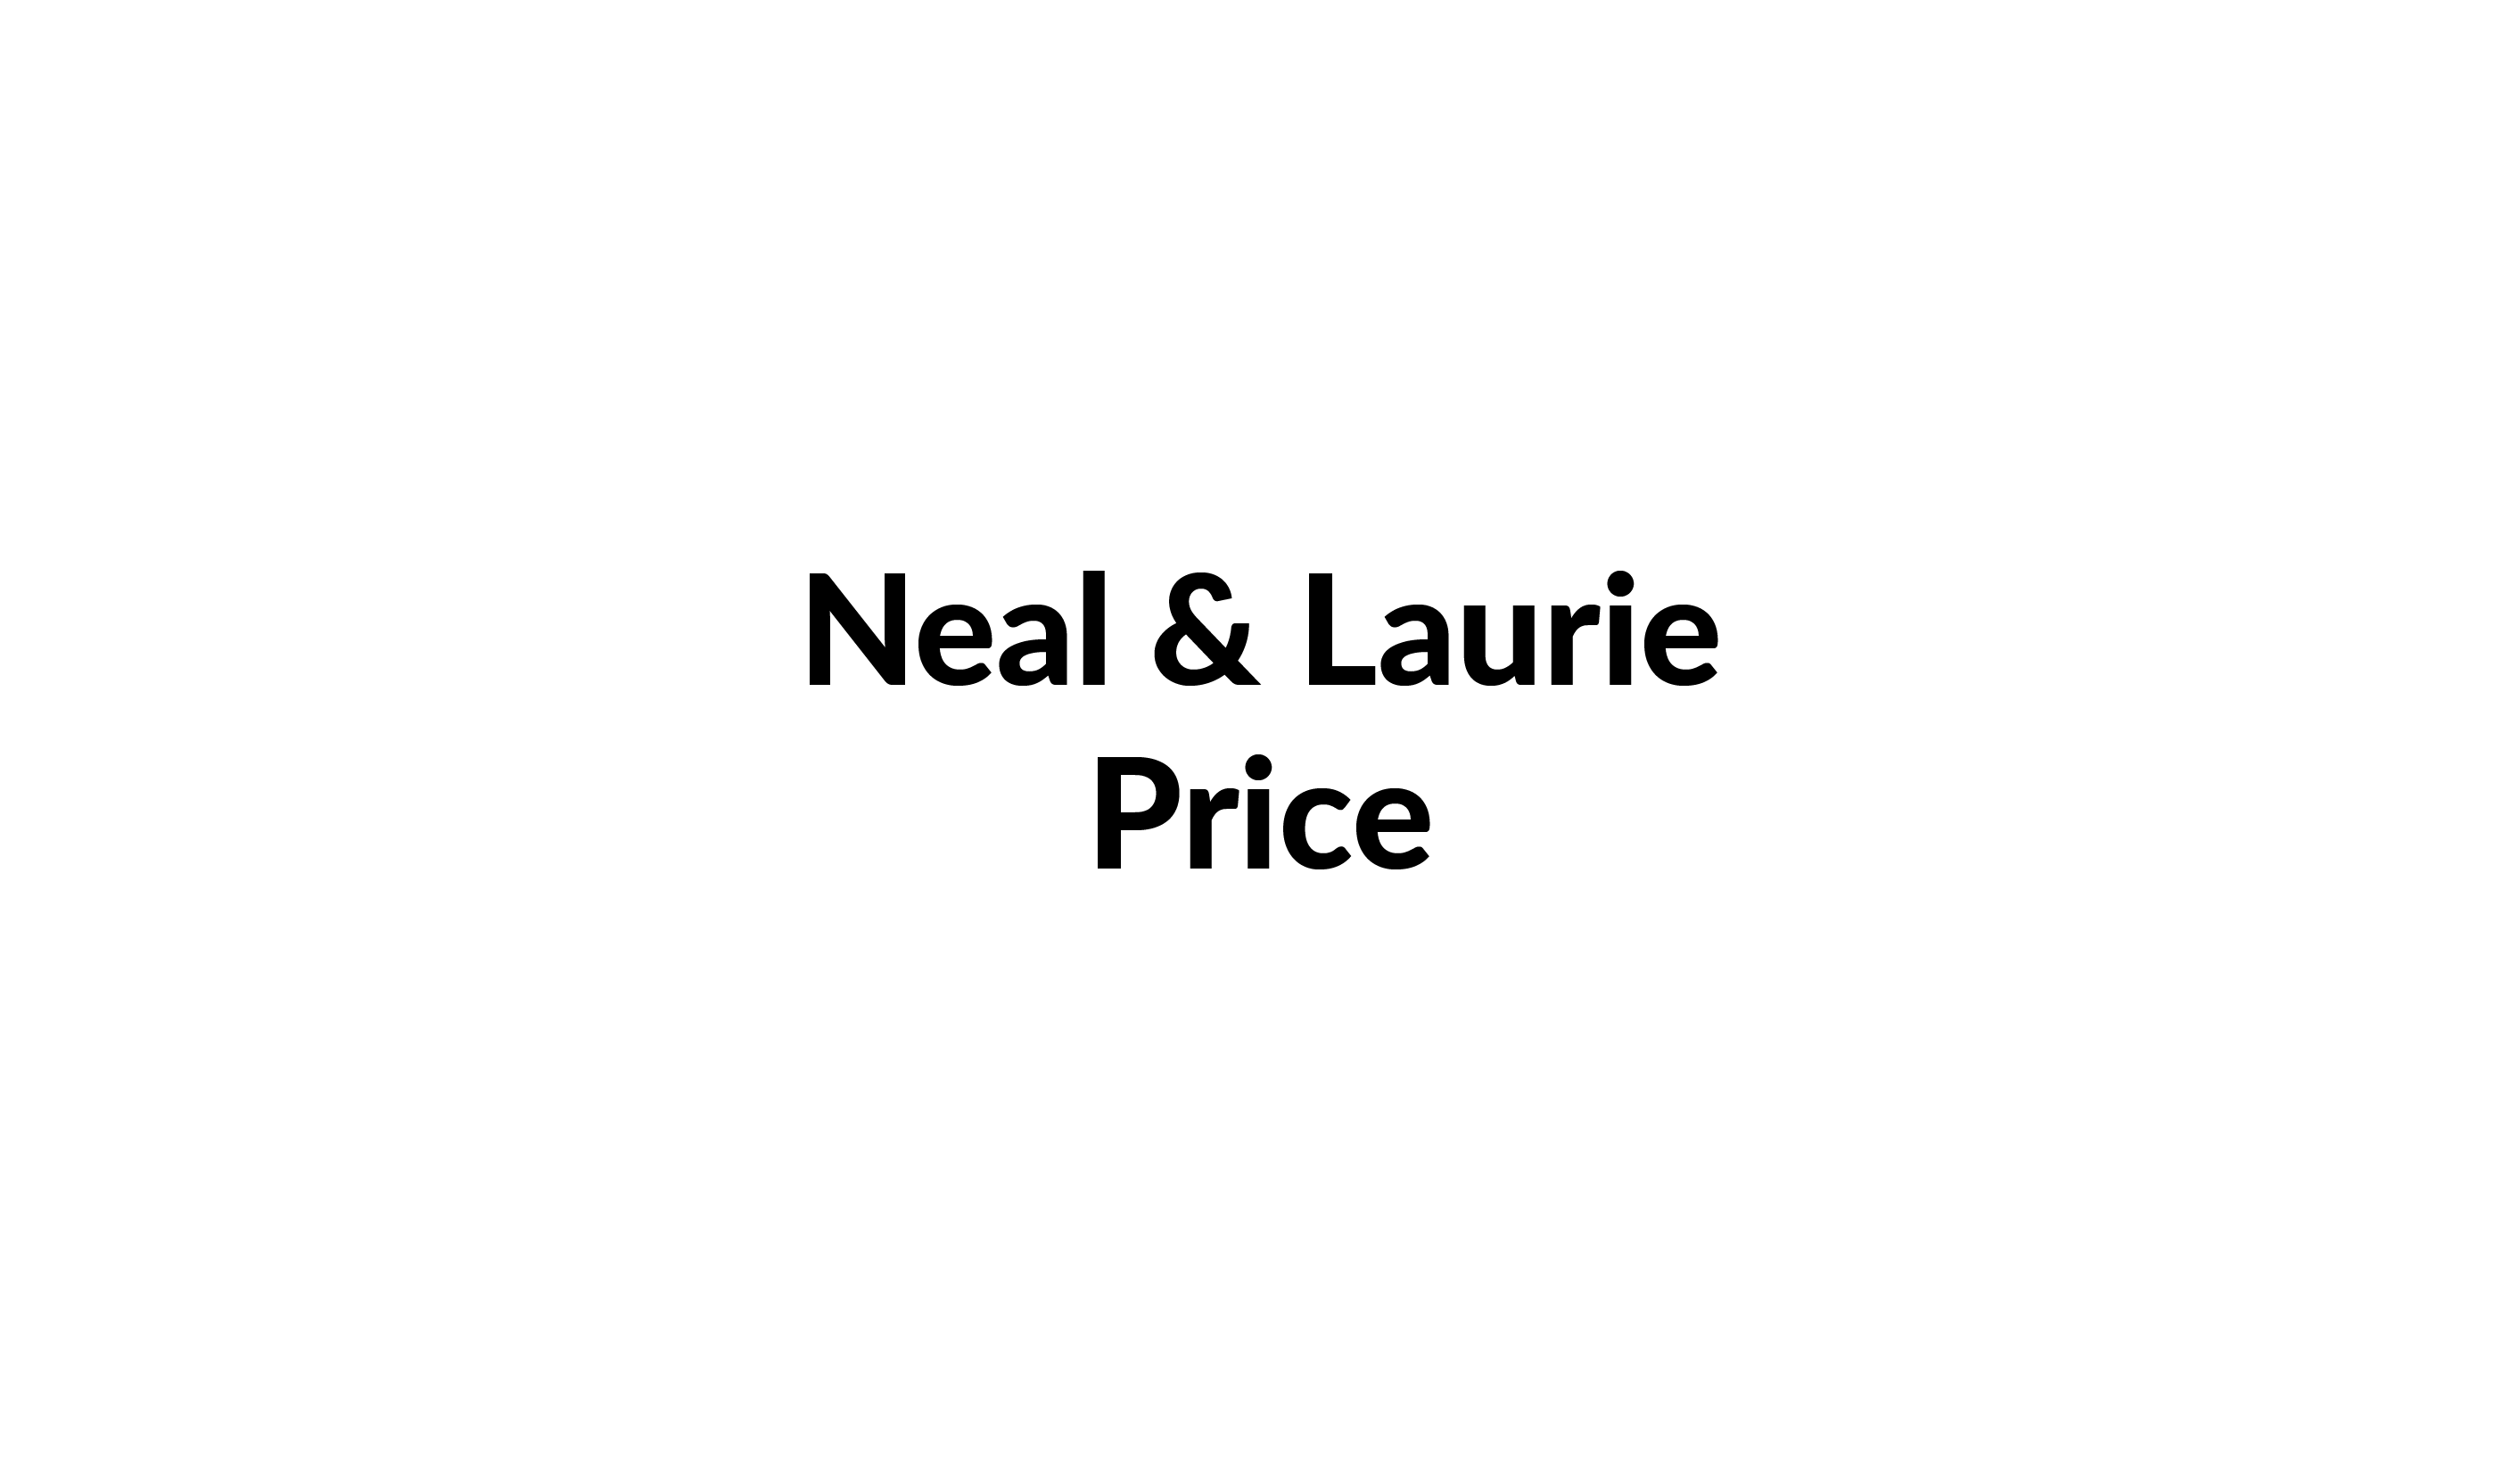 Neal and Laurie Price